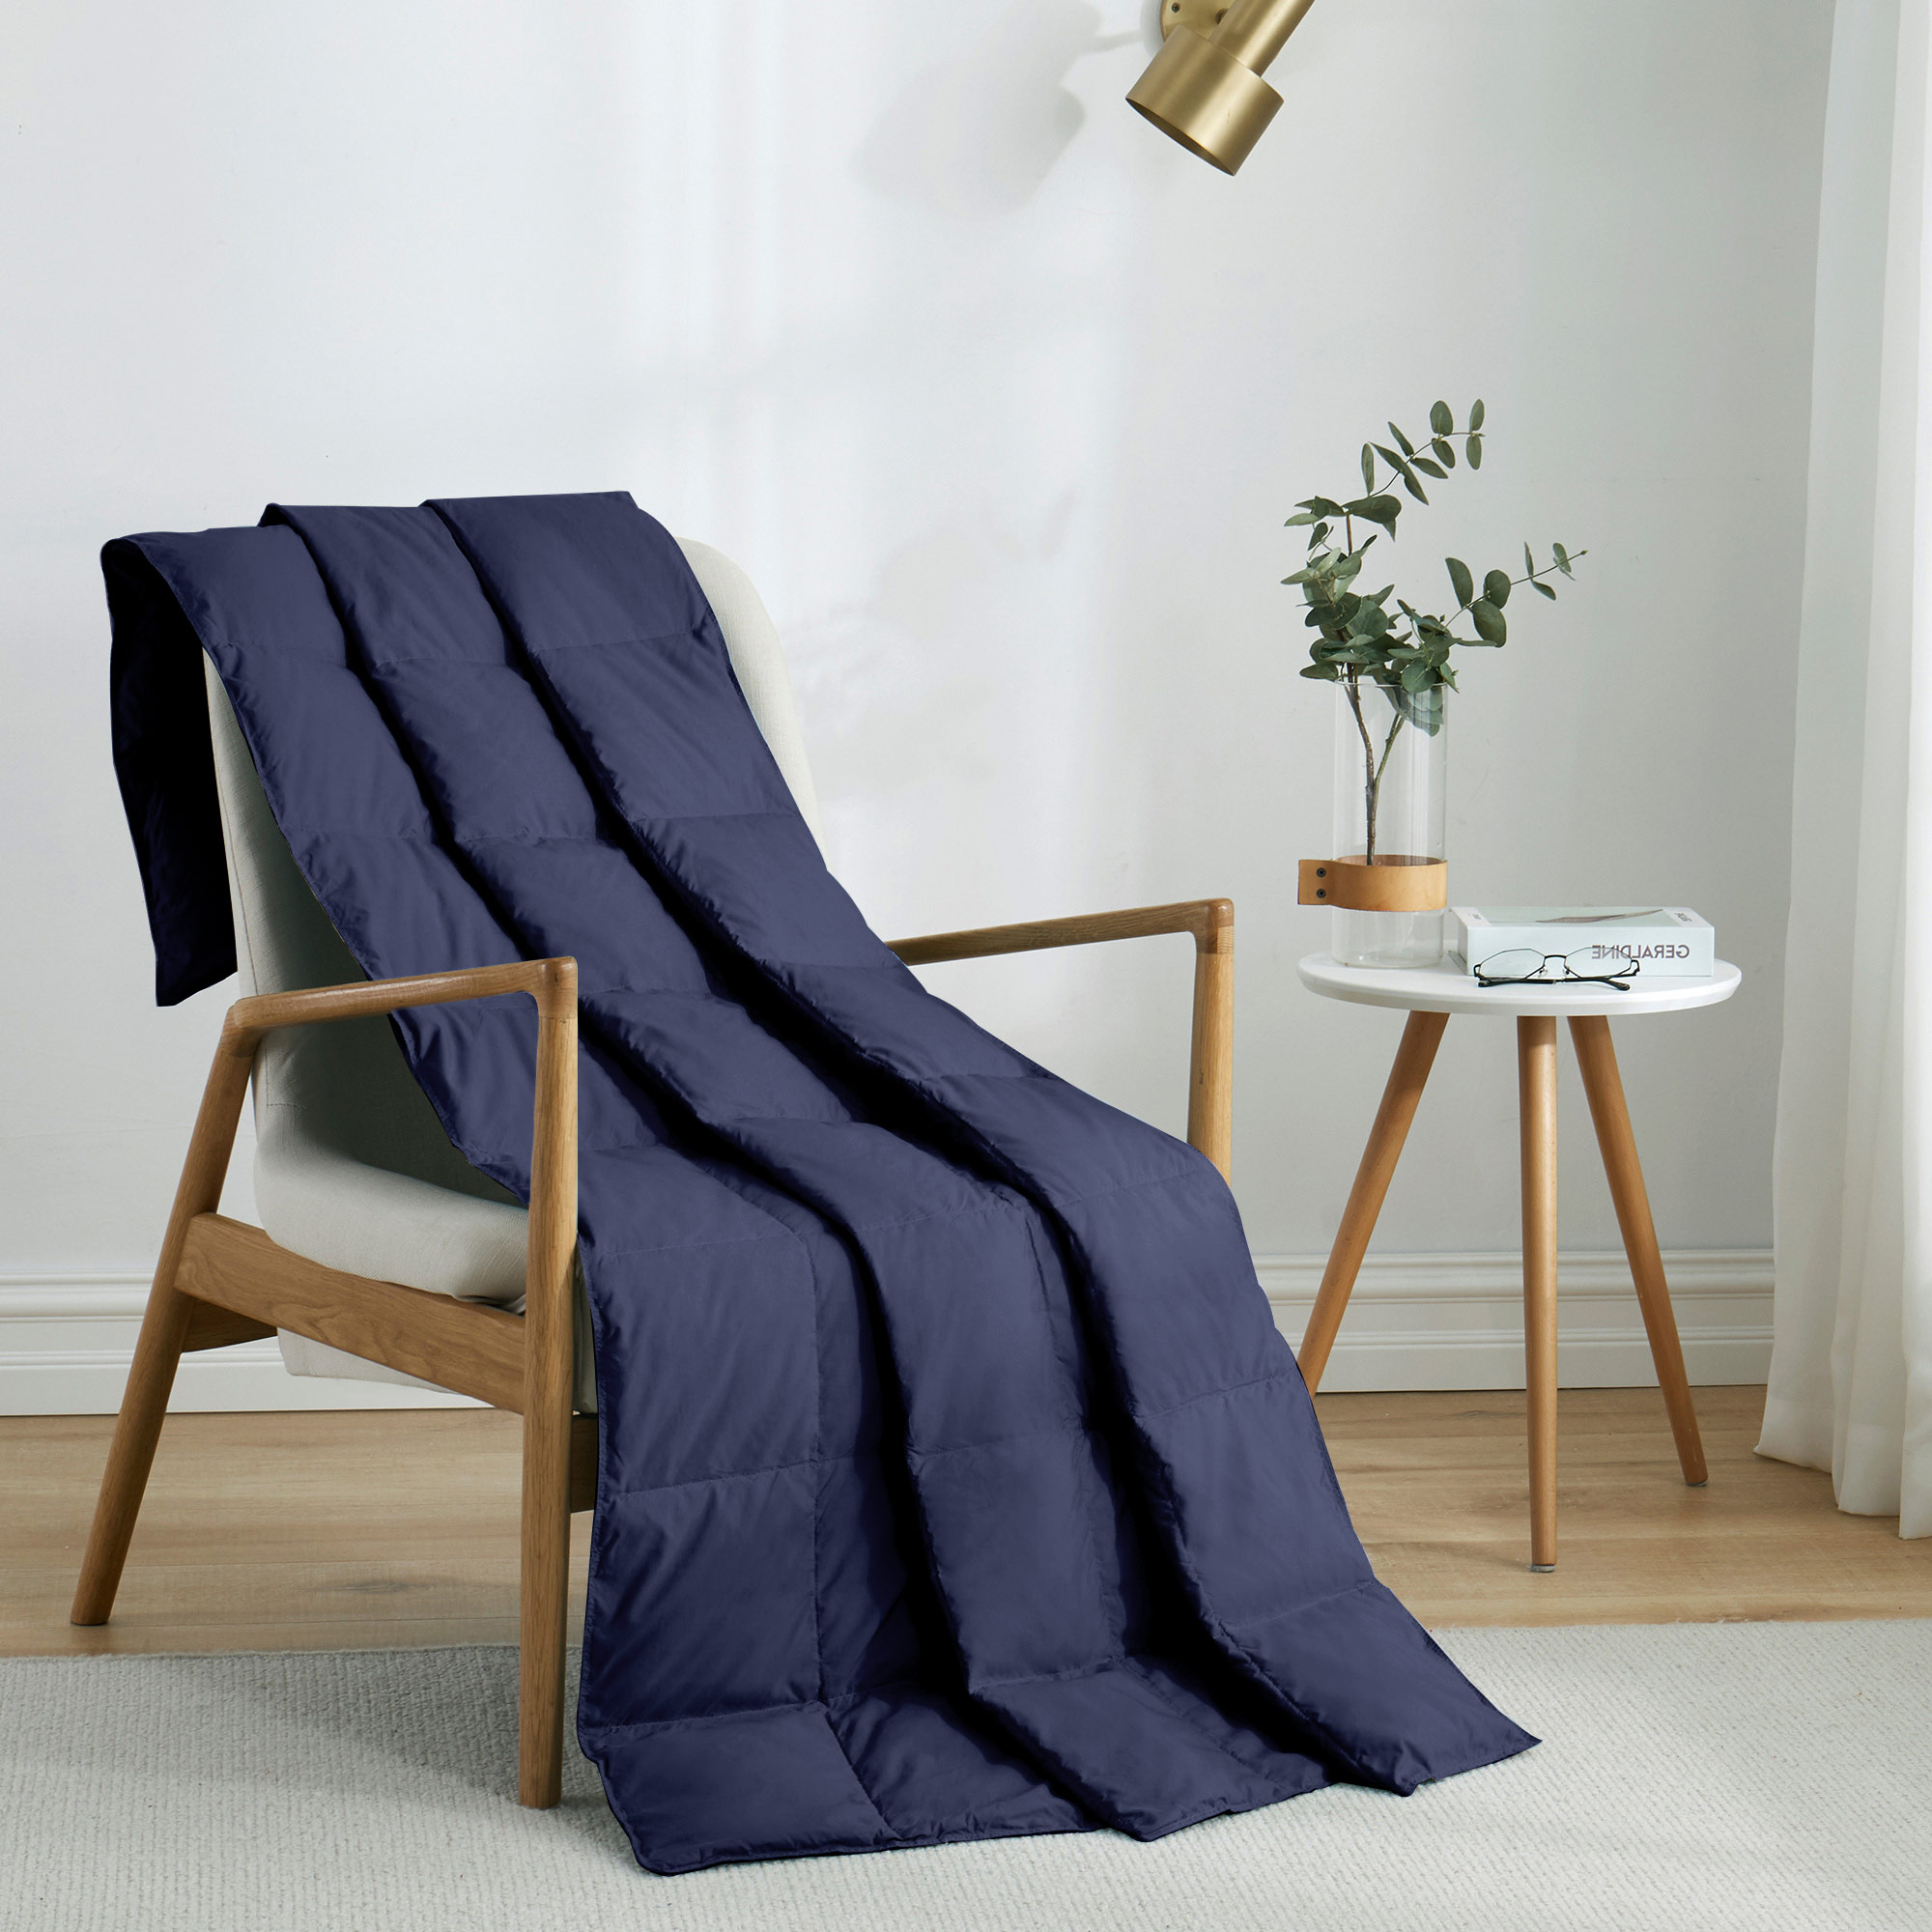 Natural Down Blanket Filled With UltraFeather And Down, Throw Blanket (50 X 70) Sewn Through Box Design - Navy